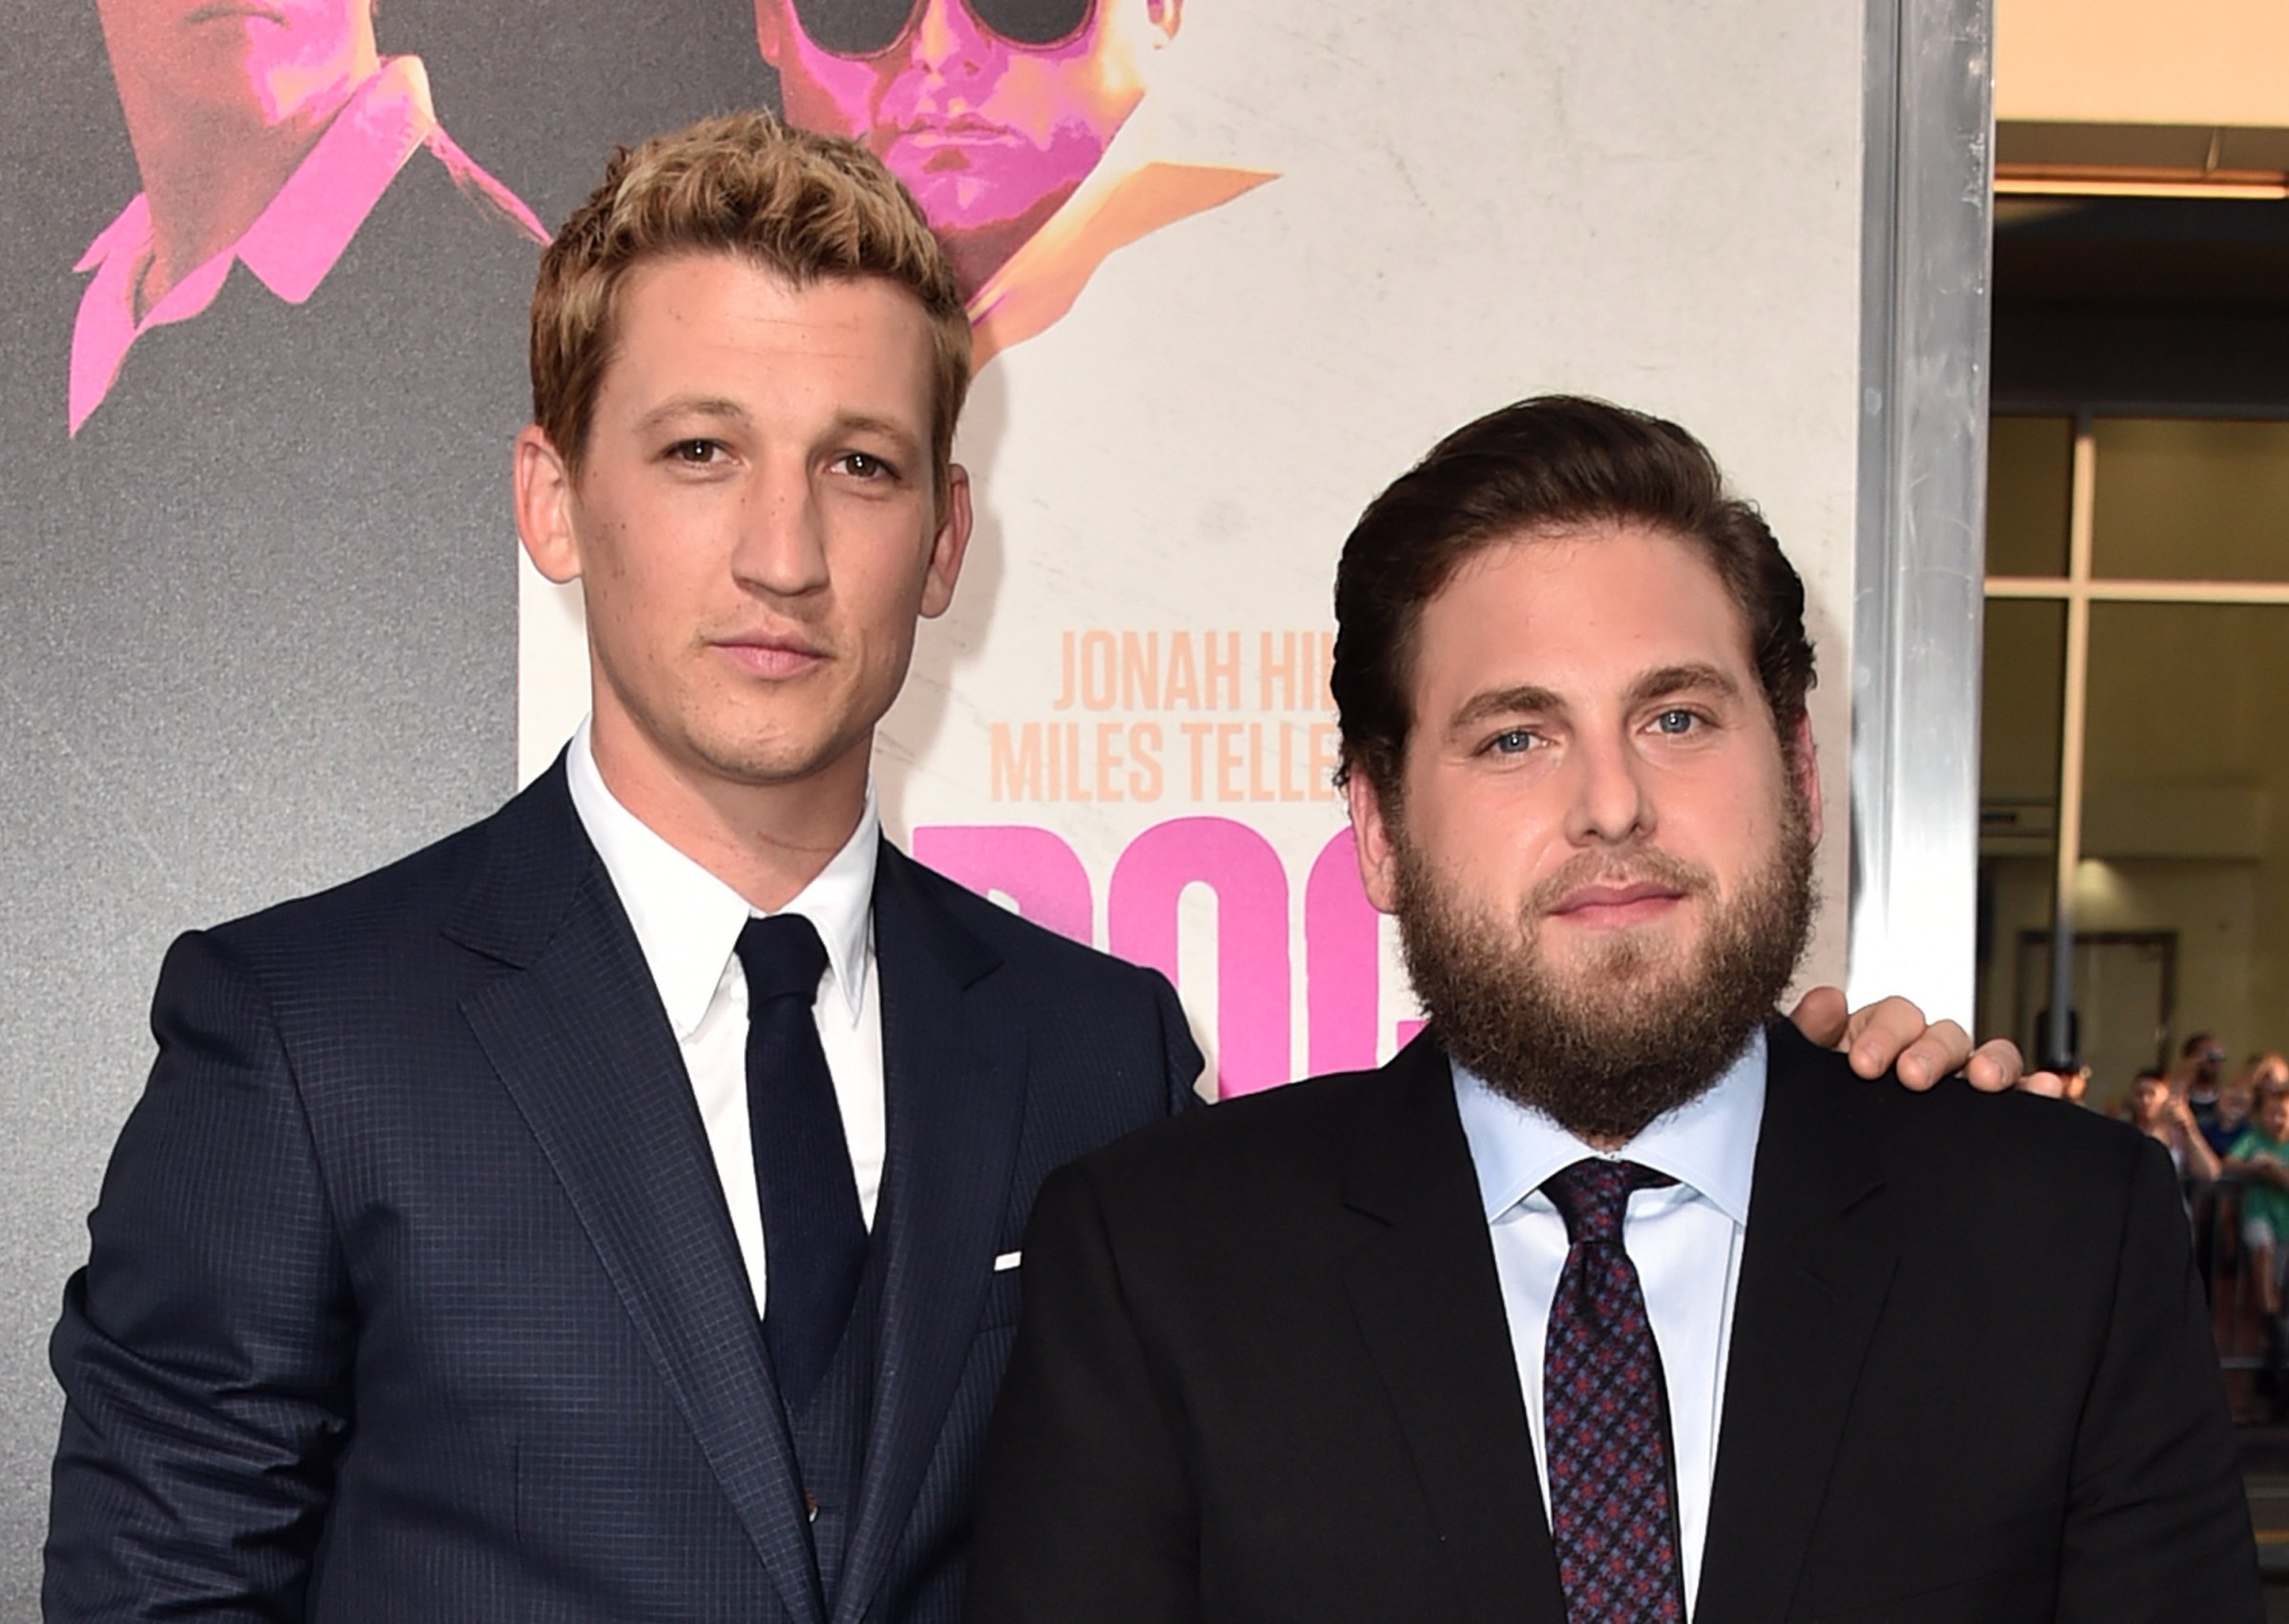 Actors Miles Teller (L) and Jonah Hill attend the premiere of Warner Bros. Pictures' "War Dogs" at TCL Chinese Theatre on August 15, 2016 in Hollywood, California.